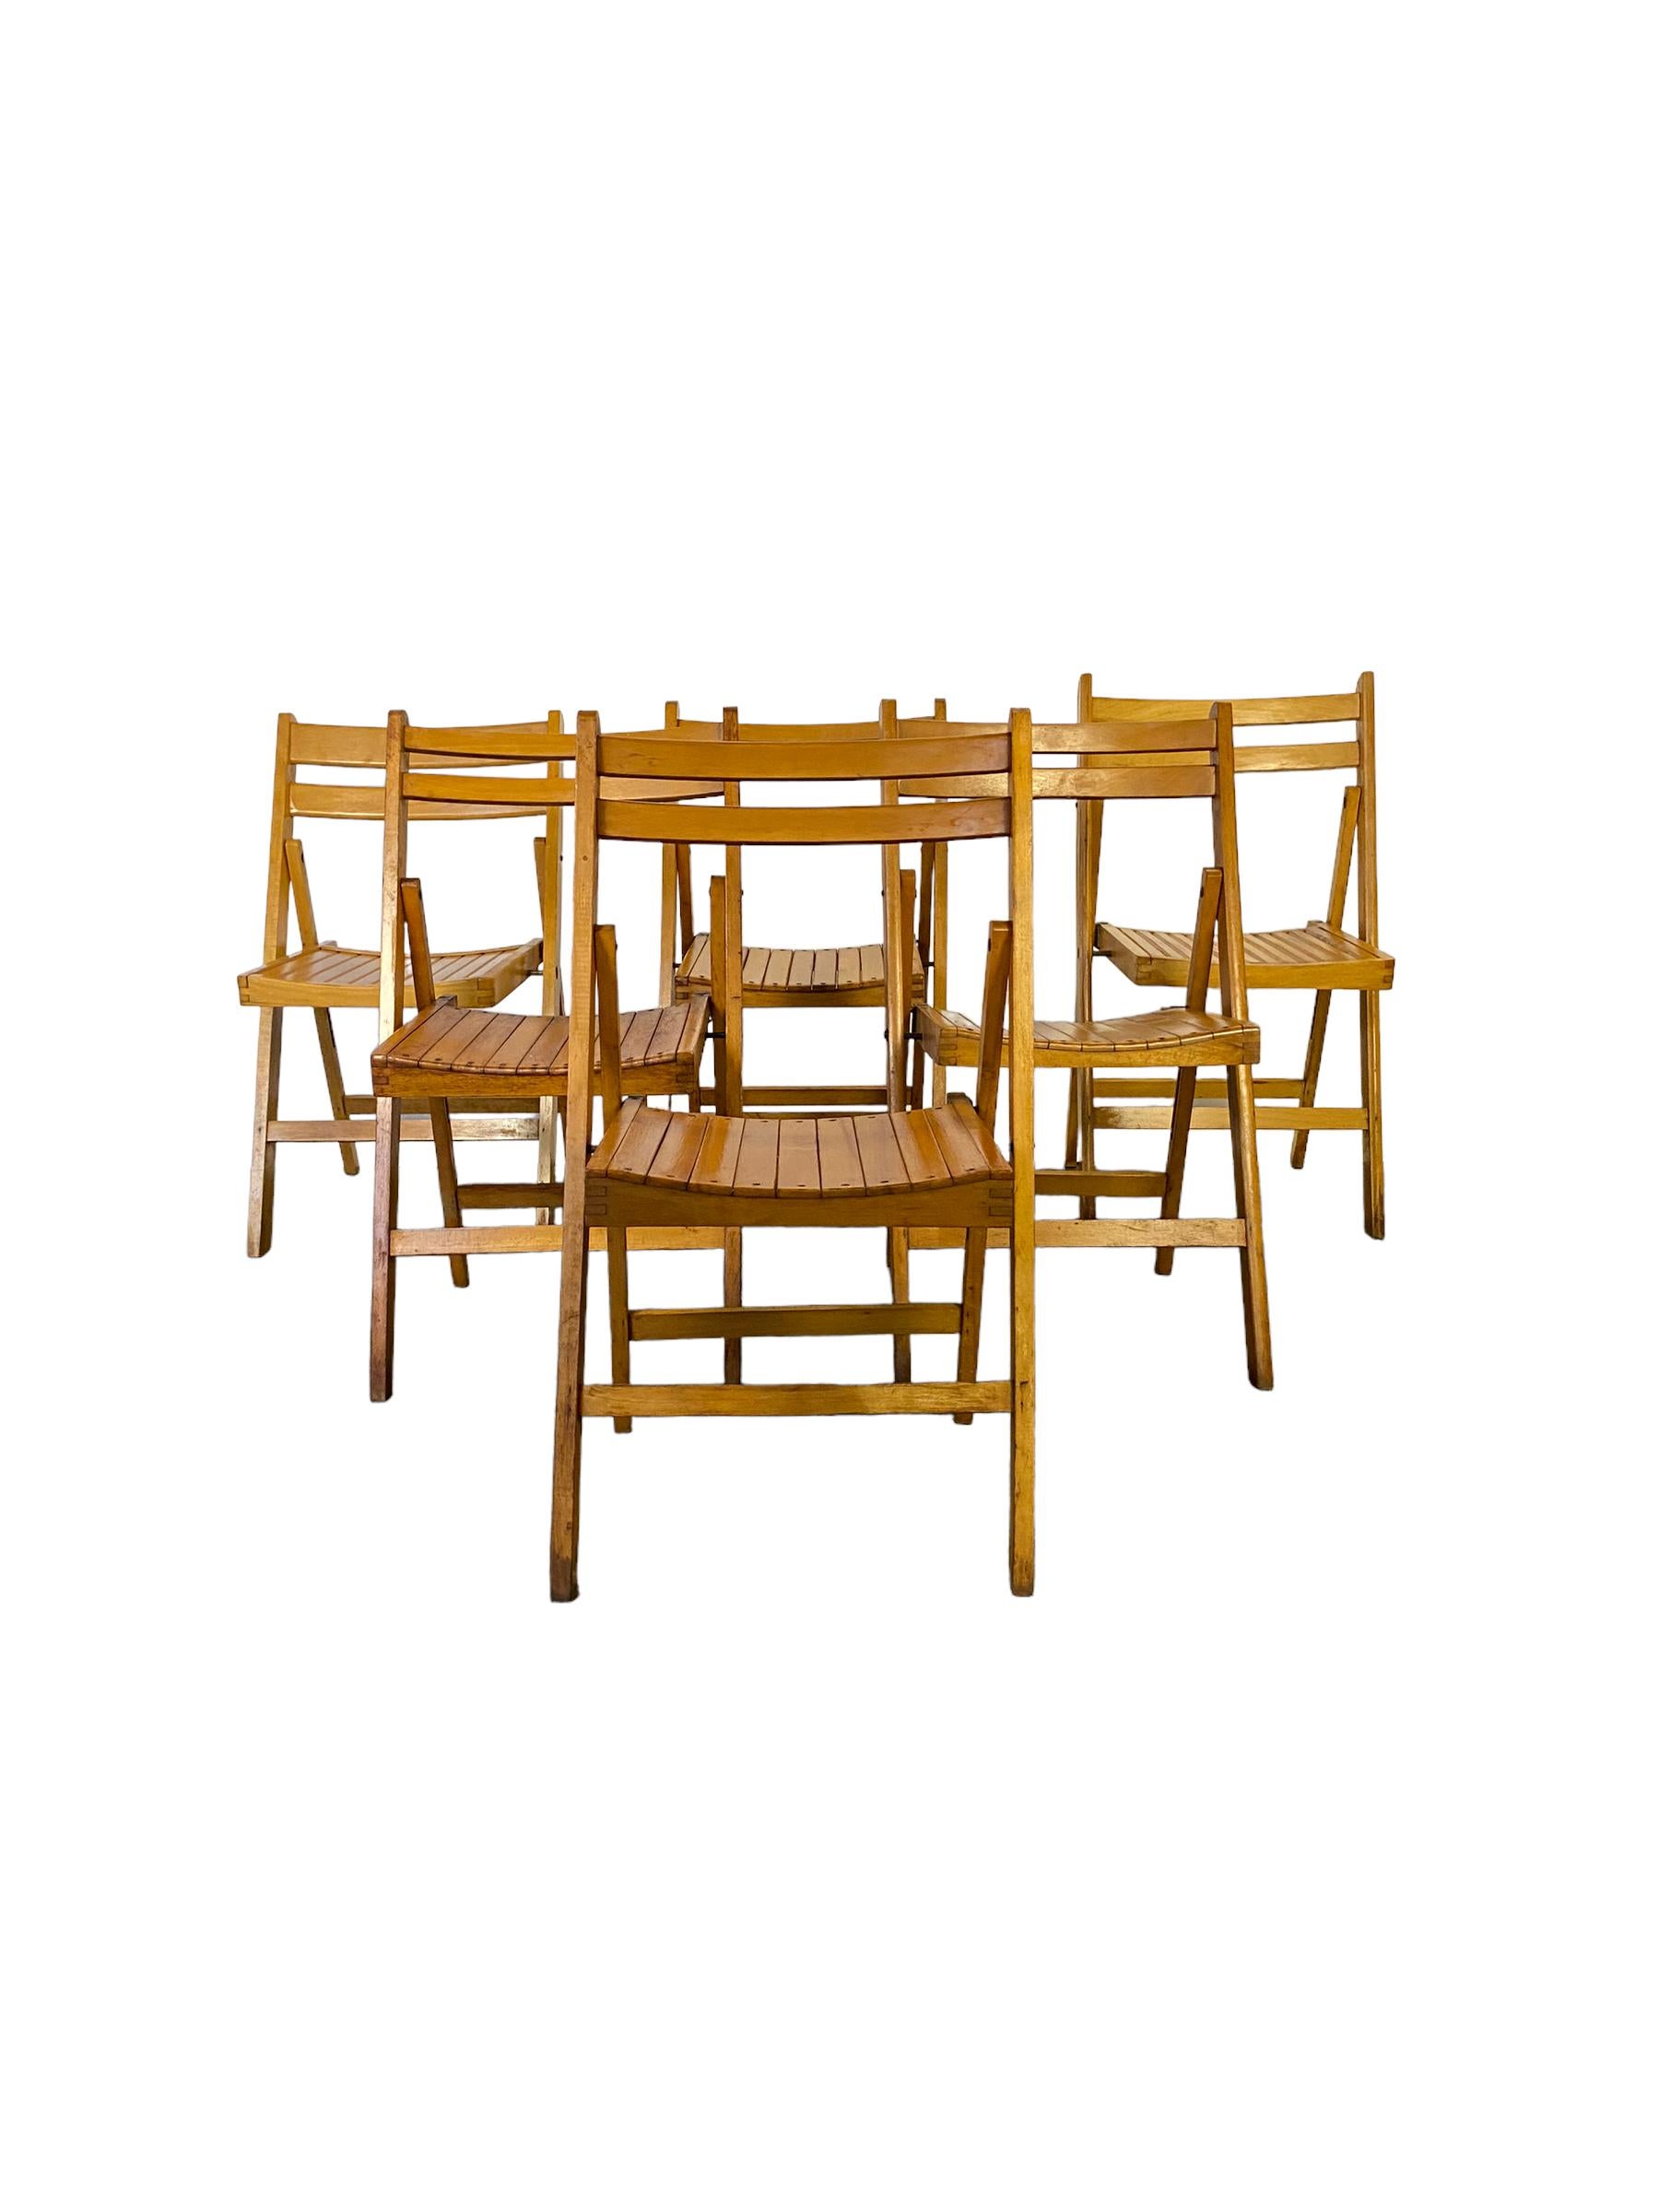 Set of six vintage mid century wood folding chairs with slatted wood seats. Good vintage condition with minor wear consistent with use. Easy to fold and compact for storage when not in use. Made in Yugoslavia. Four are exact matches and a pair of